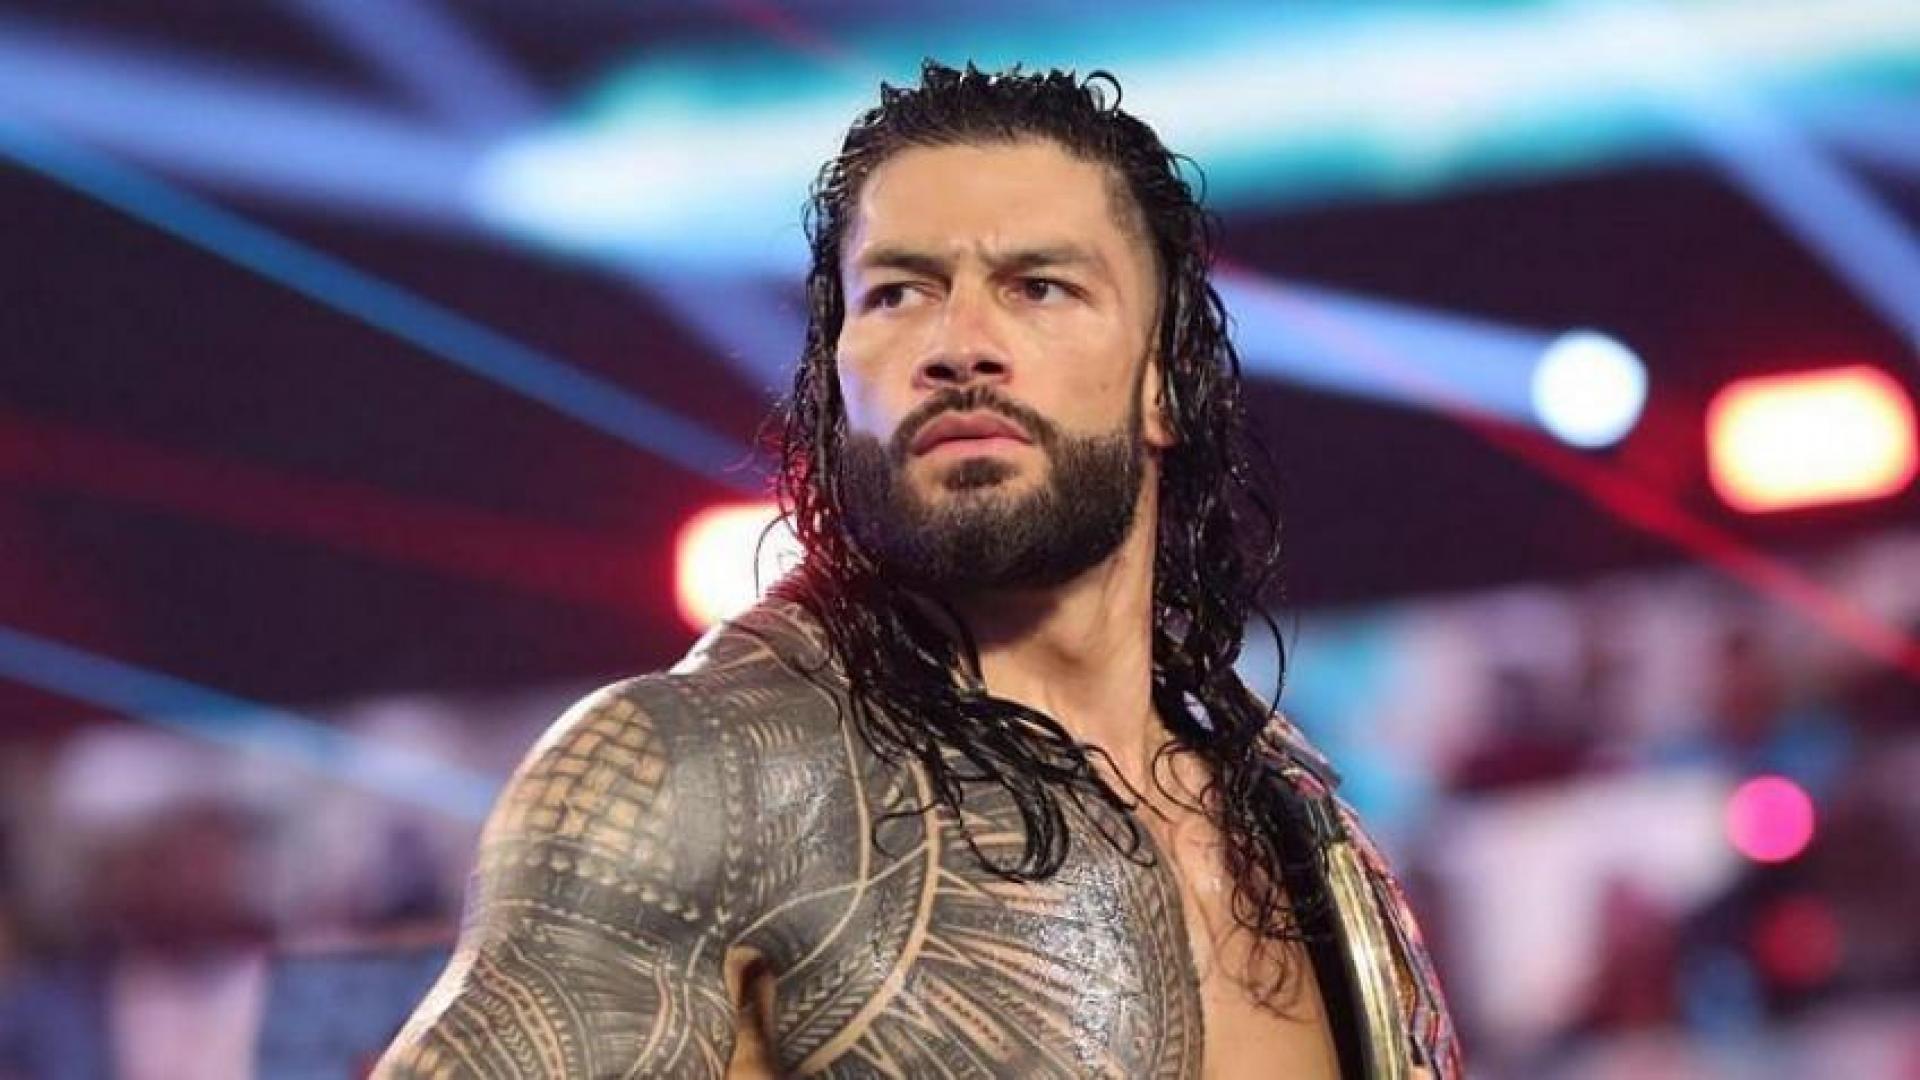 WWE Superstars who could realistically pin Roman Reigns in 2021